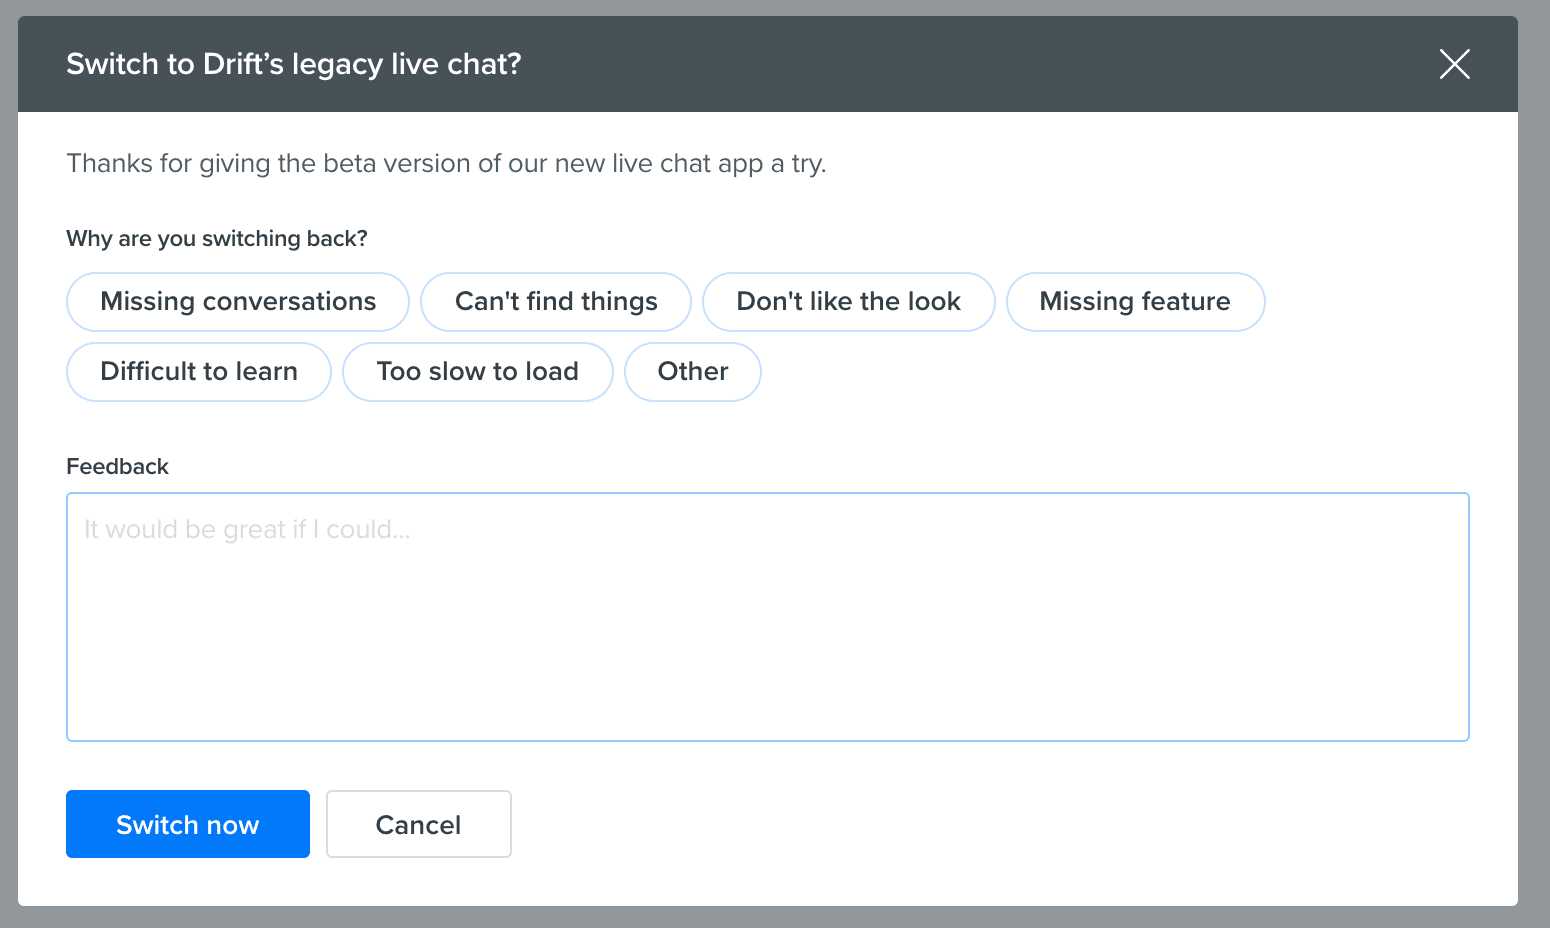 Survey used to collect feedback on Drift’s live chat software